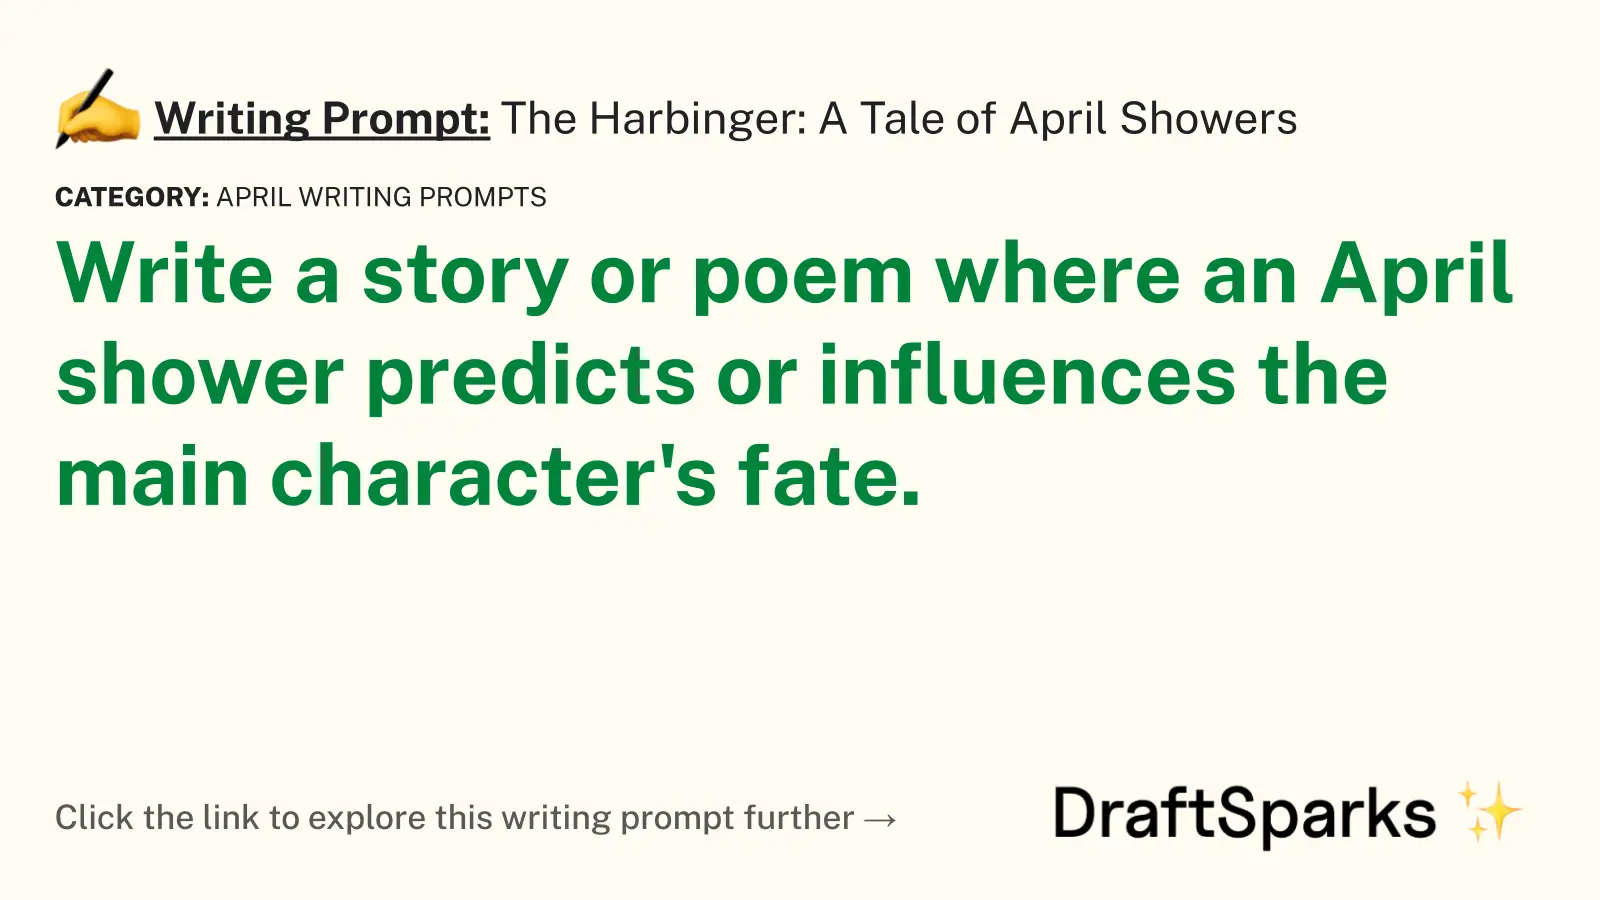 The Harbinger: A Tale of April Showers